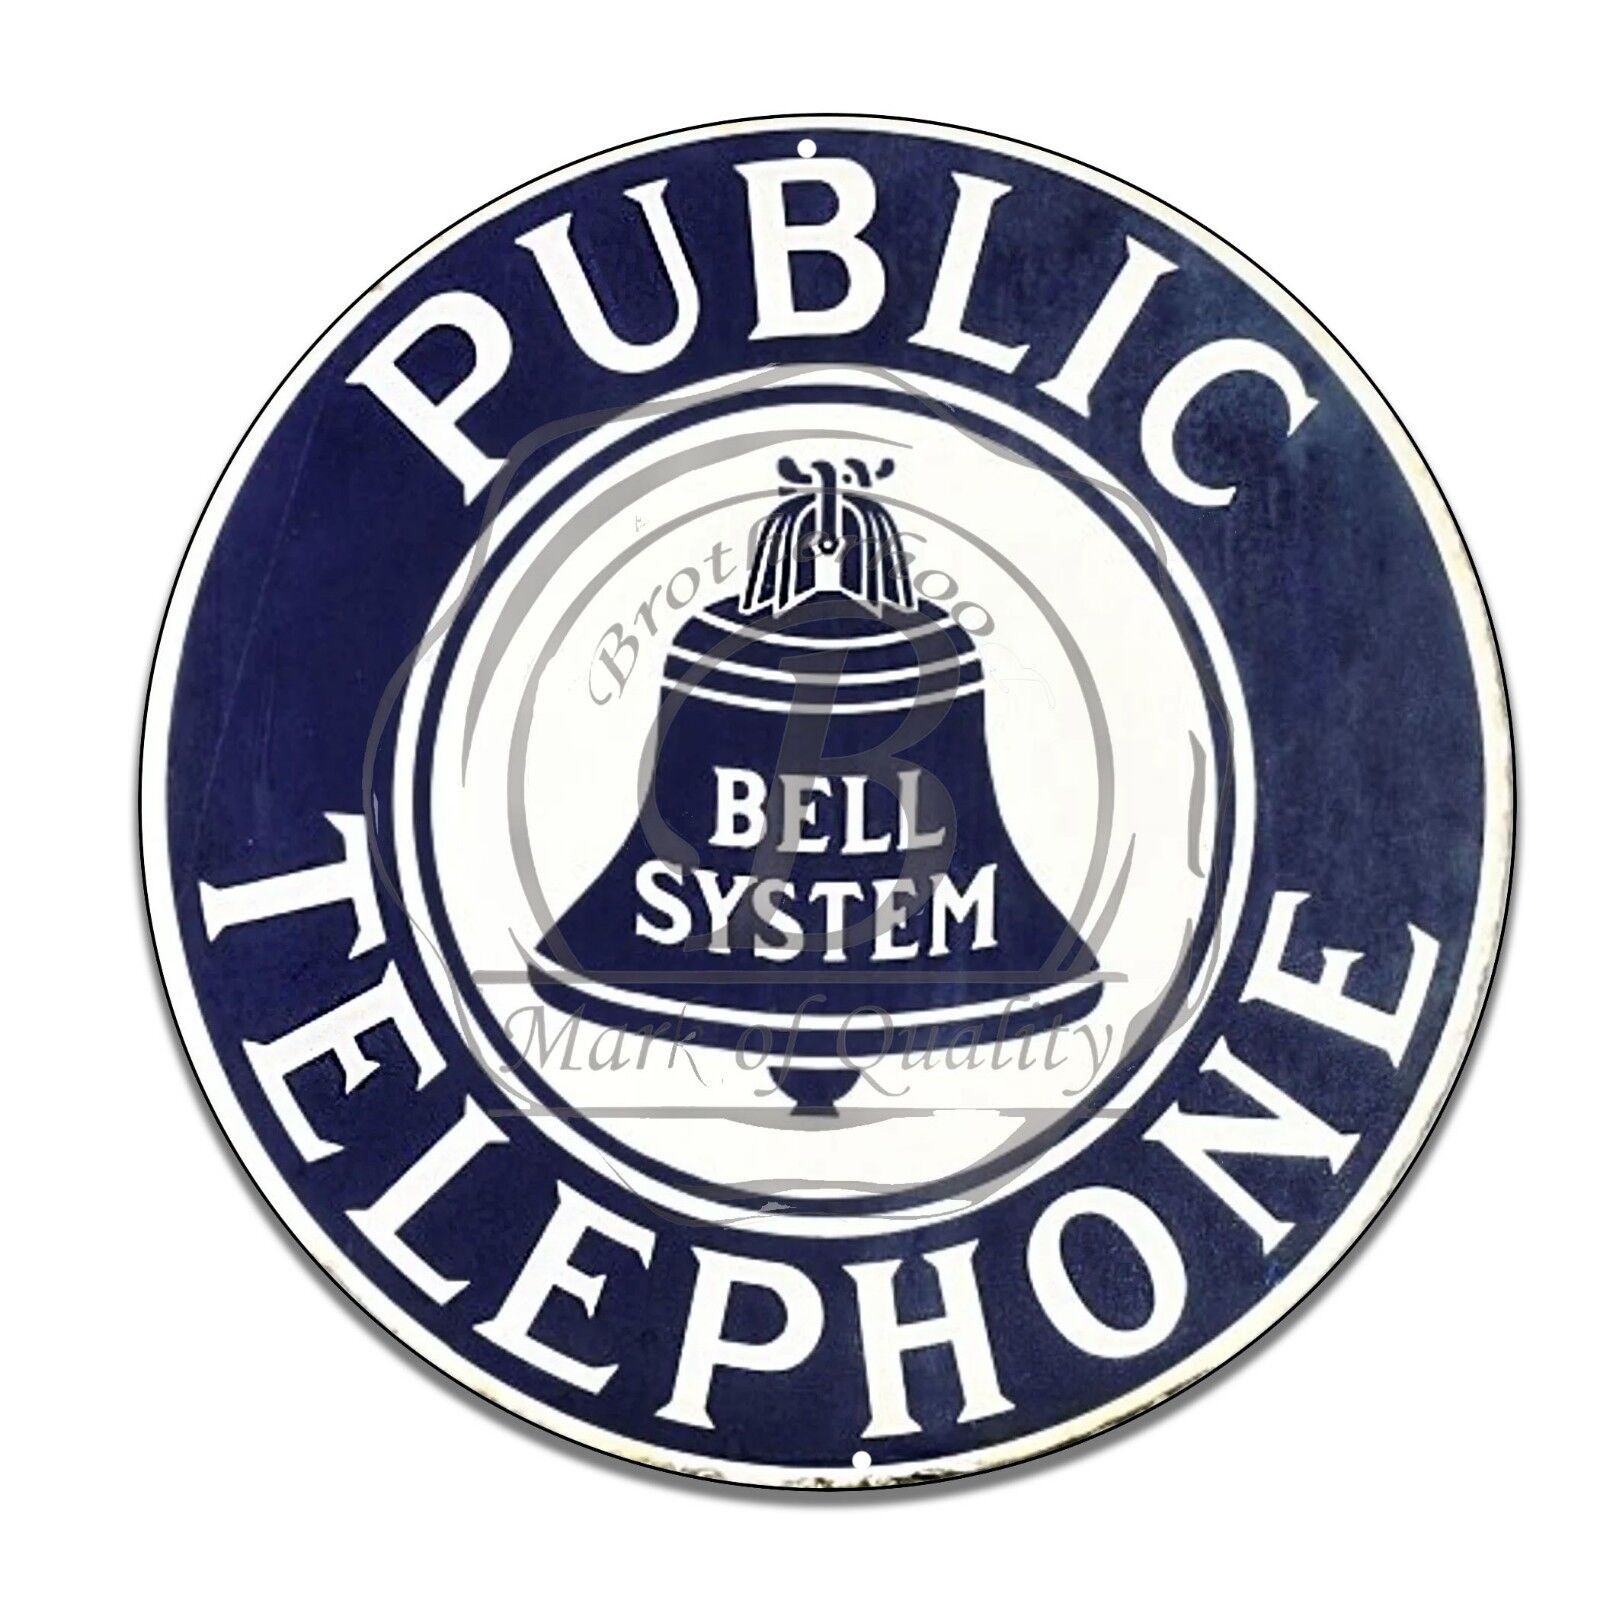 Bell System Public Telephone Reproduction 11.75" Circle Aluminum Sign Без бренда